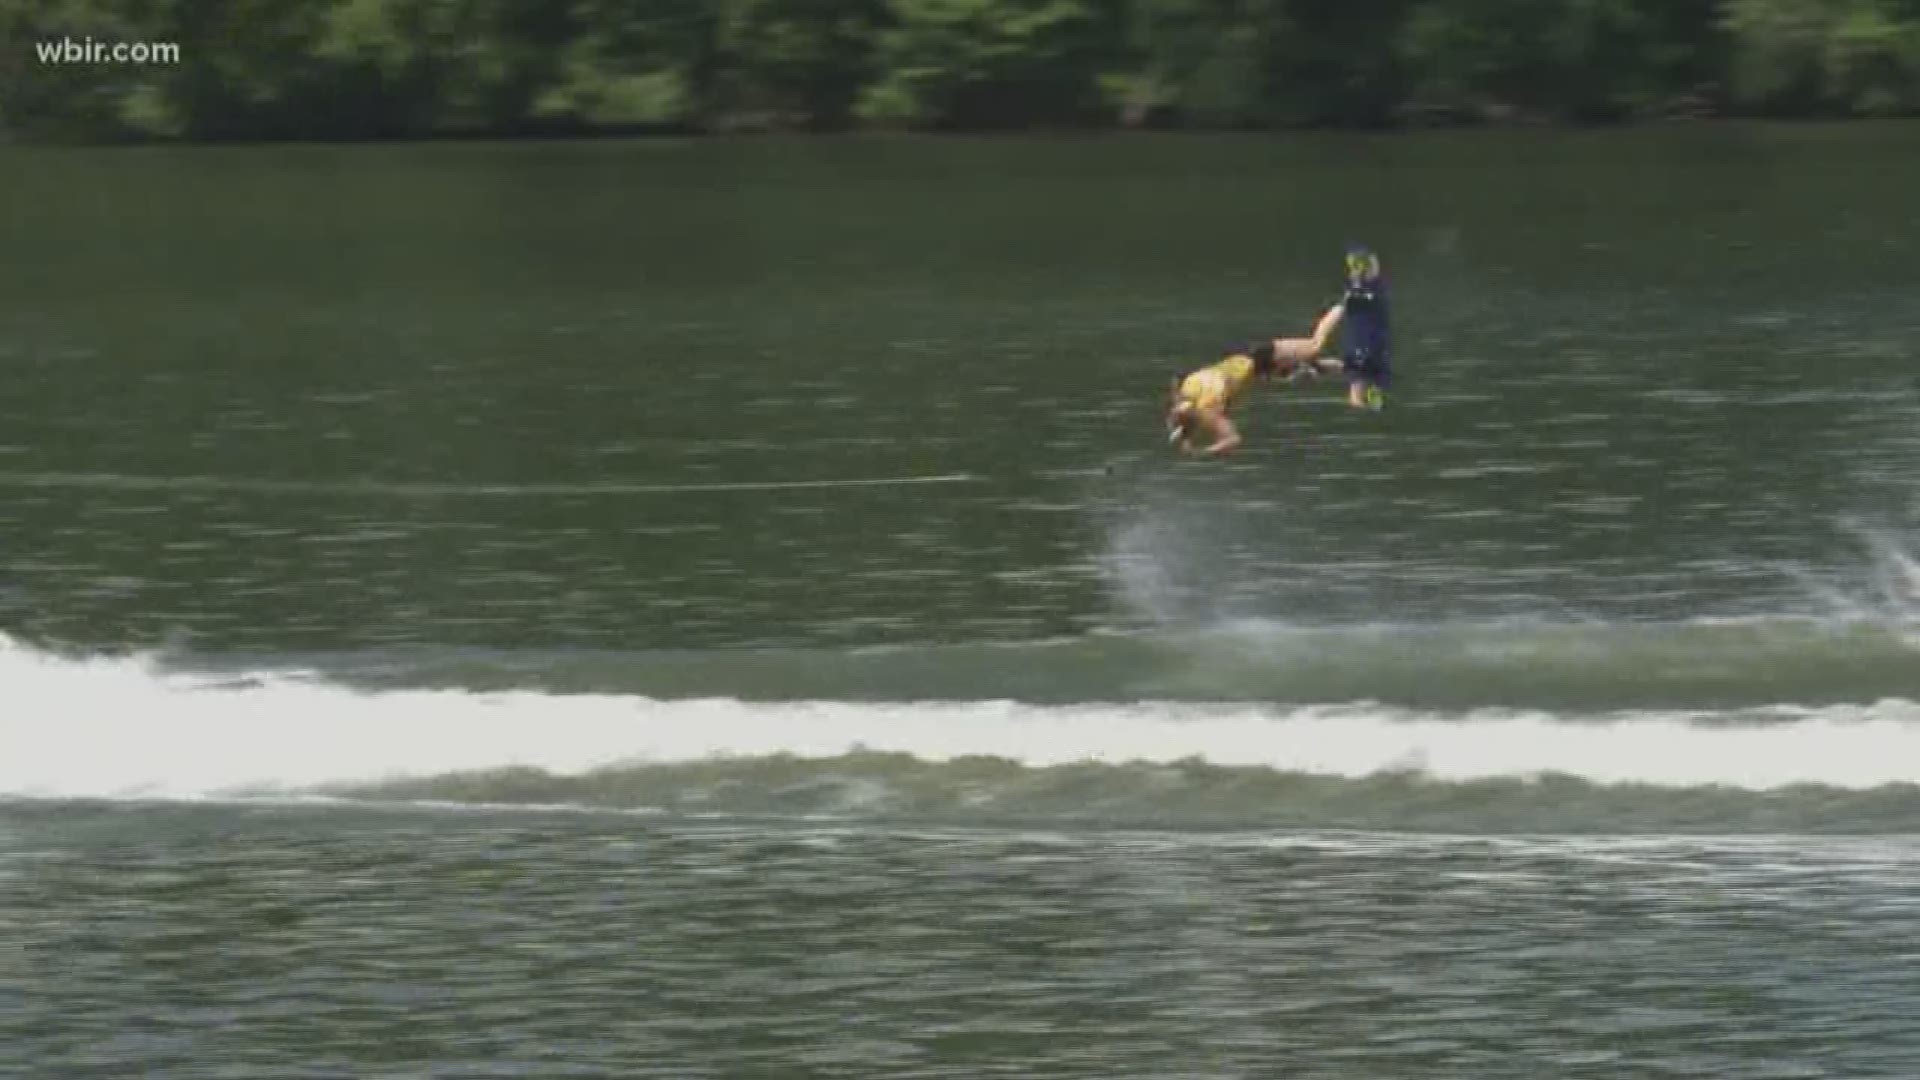 Wakeboarders congregated for another day of competition.